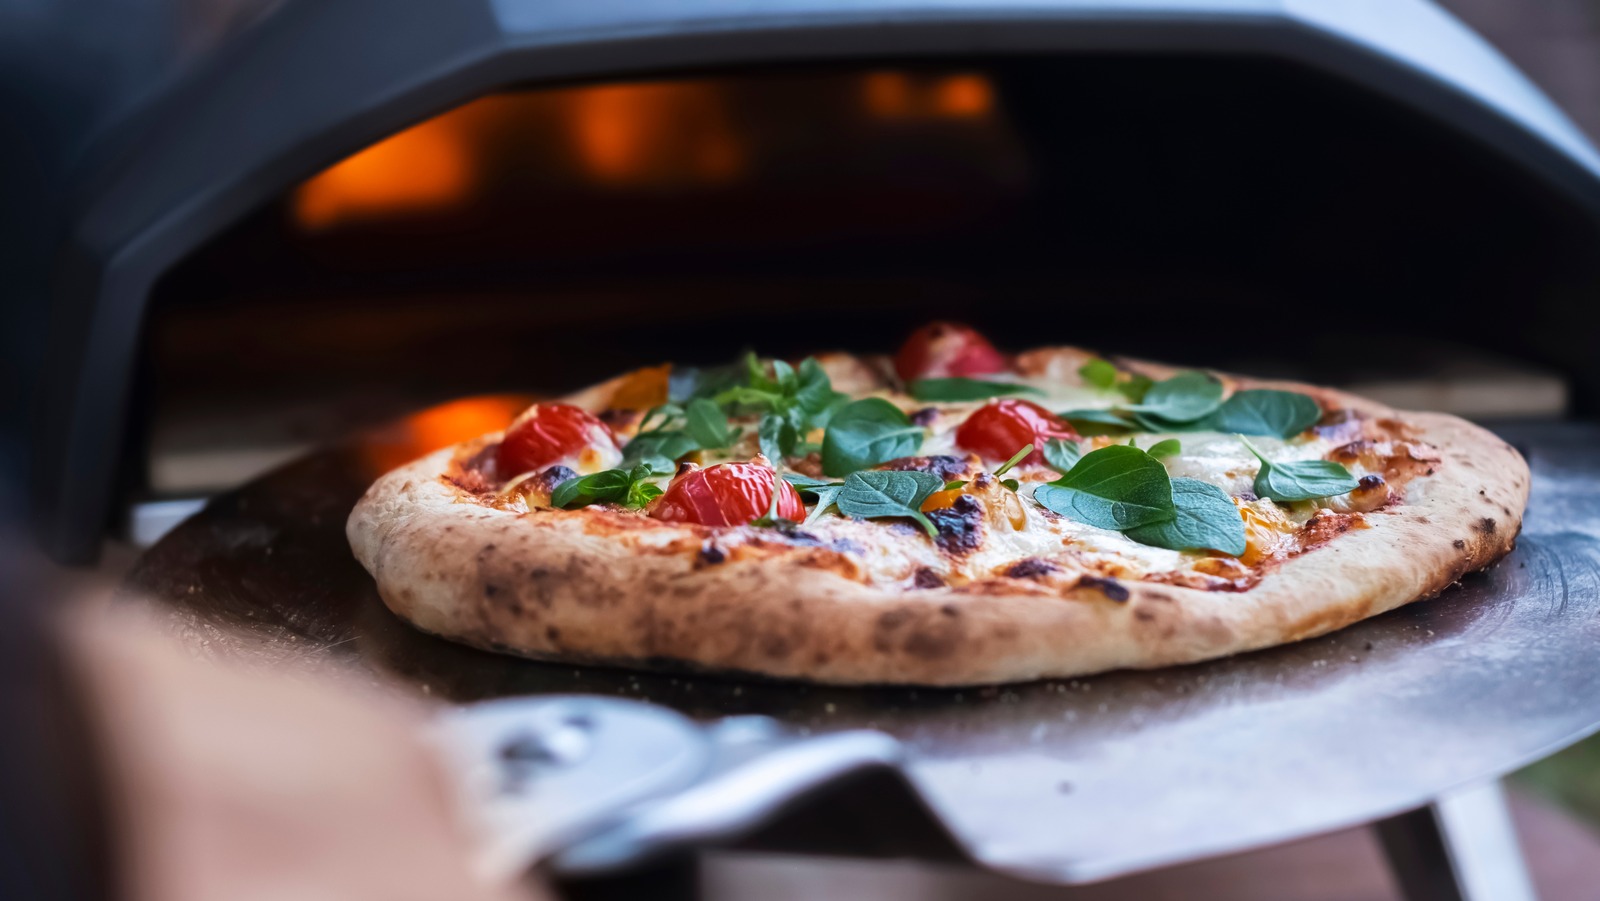 https://www.tastingtable.com/img/gallery/why-an-outdoor-pizza-oven-was-one-of-the-best-investments-i-ever-made/l-intro-1695223157.jpg